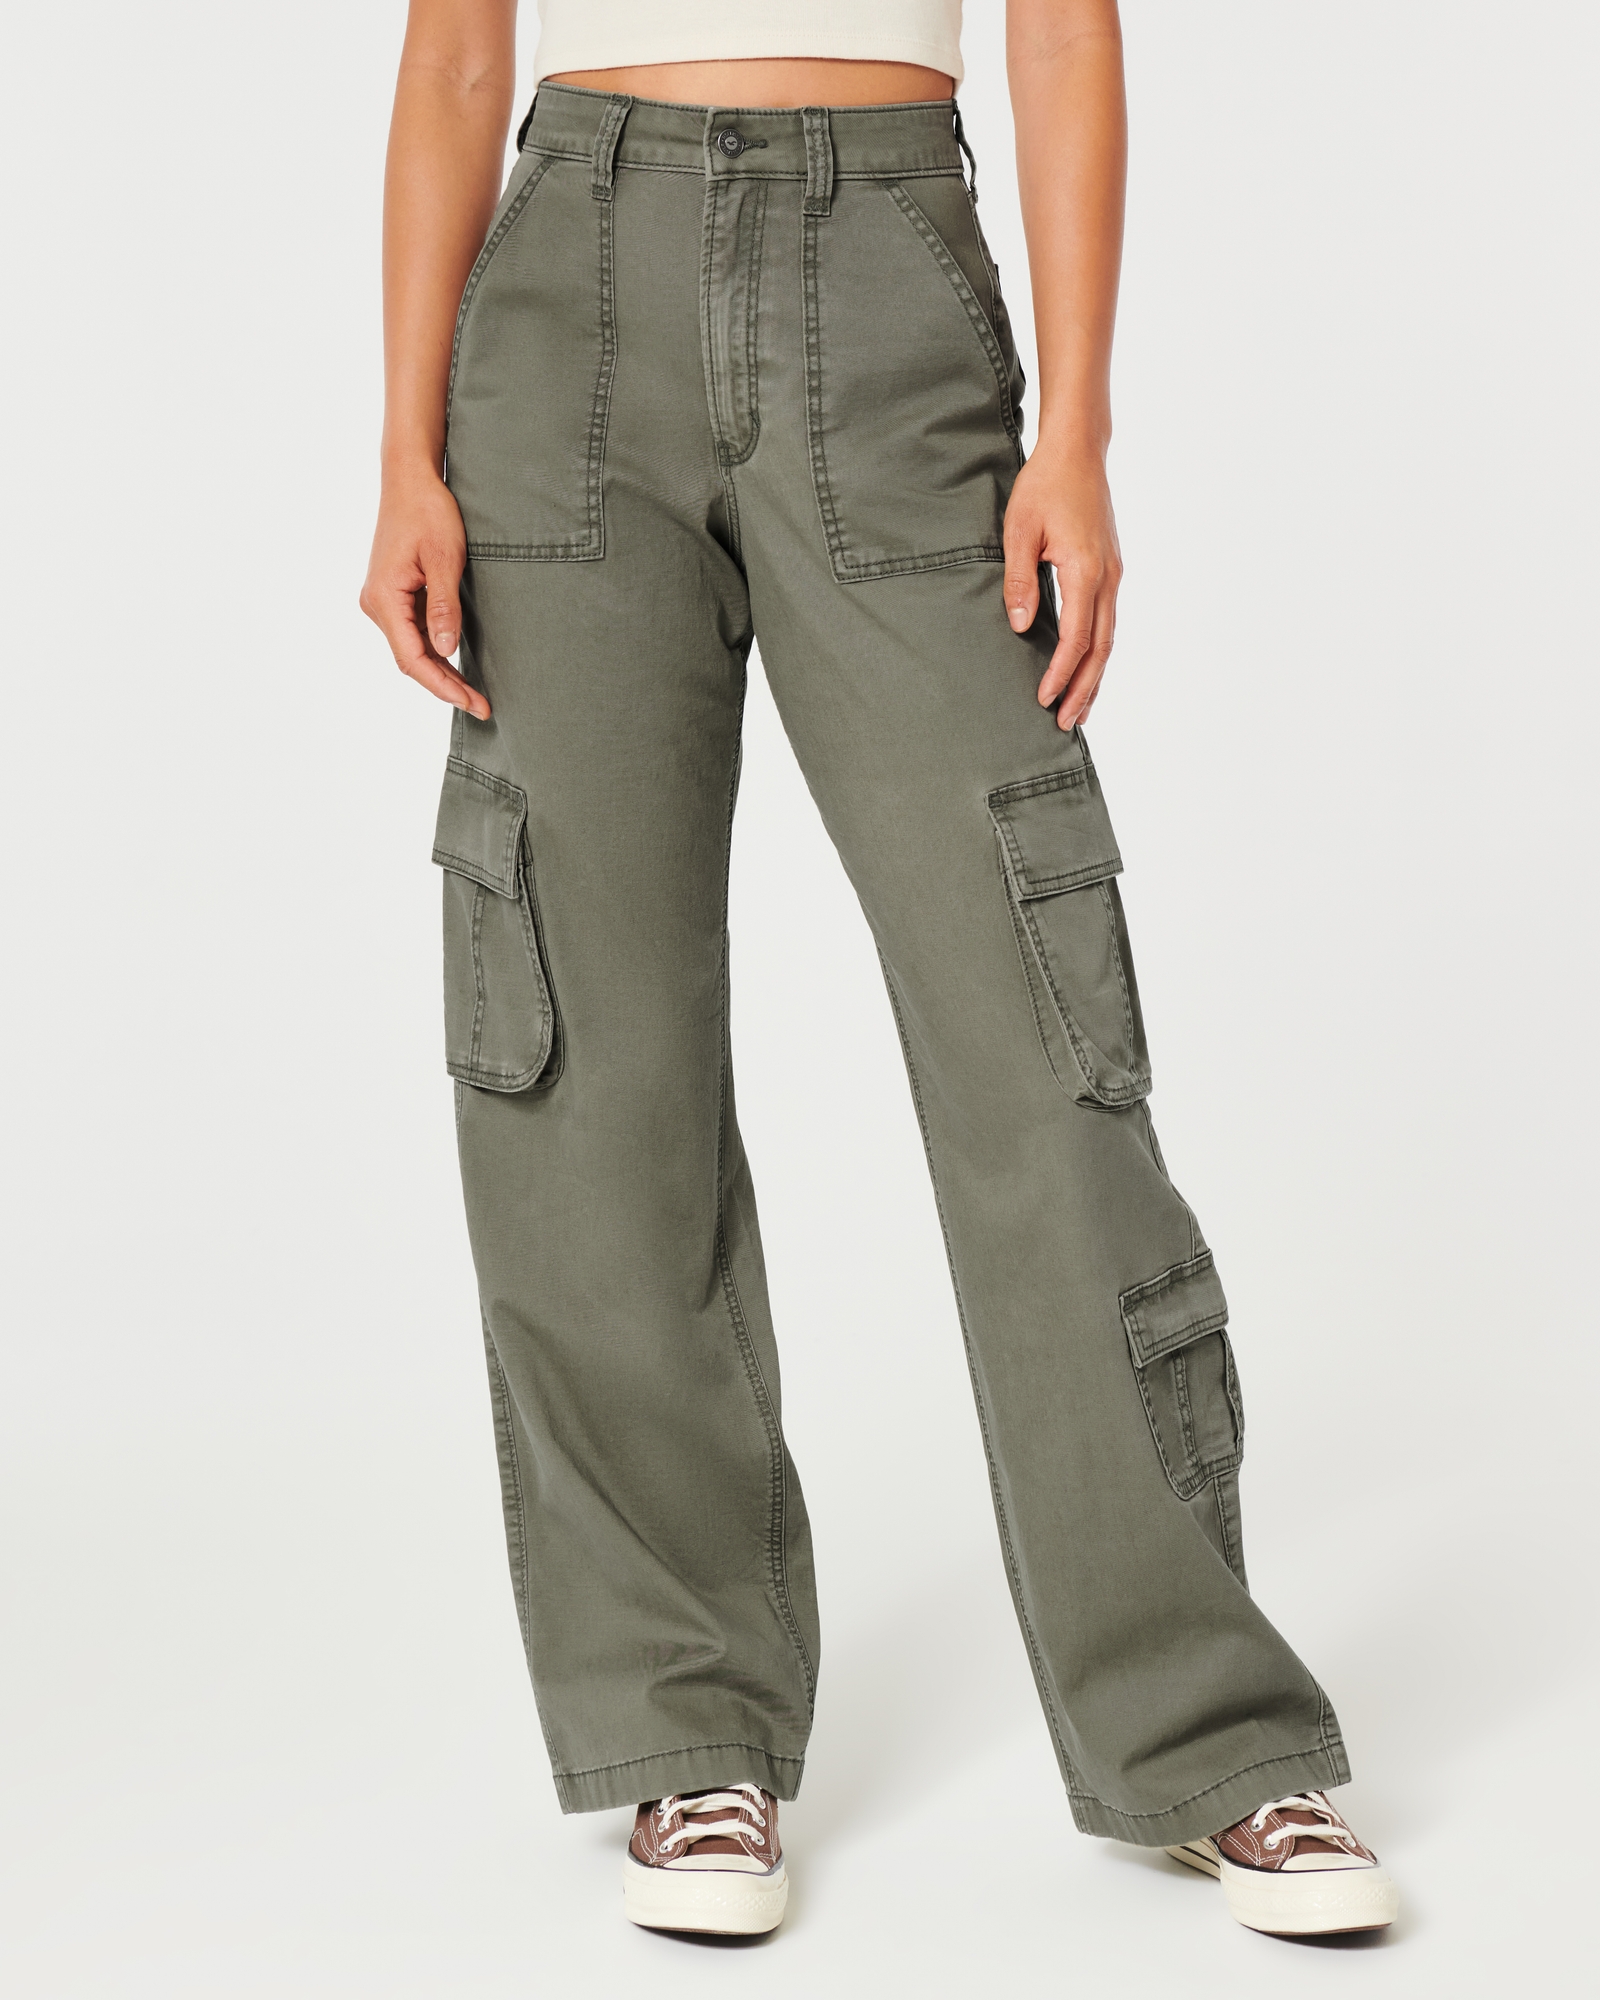 https://img.hollisterco.com/is/image/anf/KIC_356-3071-0358-330_model2.jpg?policy=product-extra-large